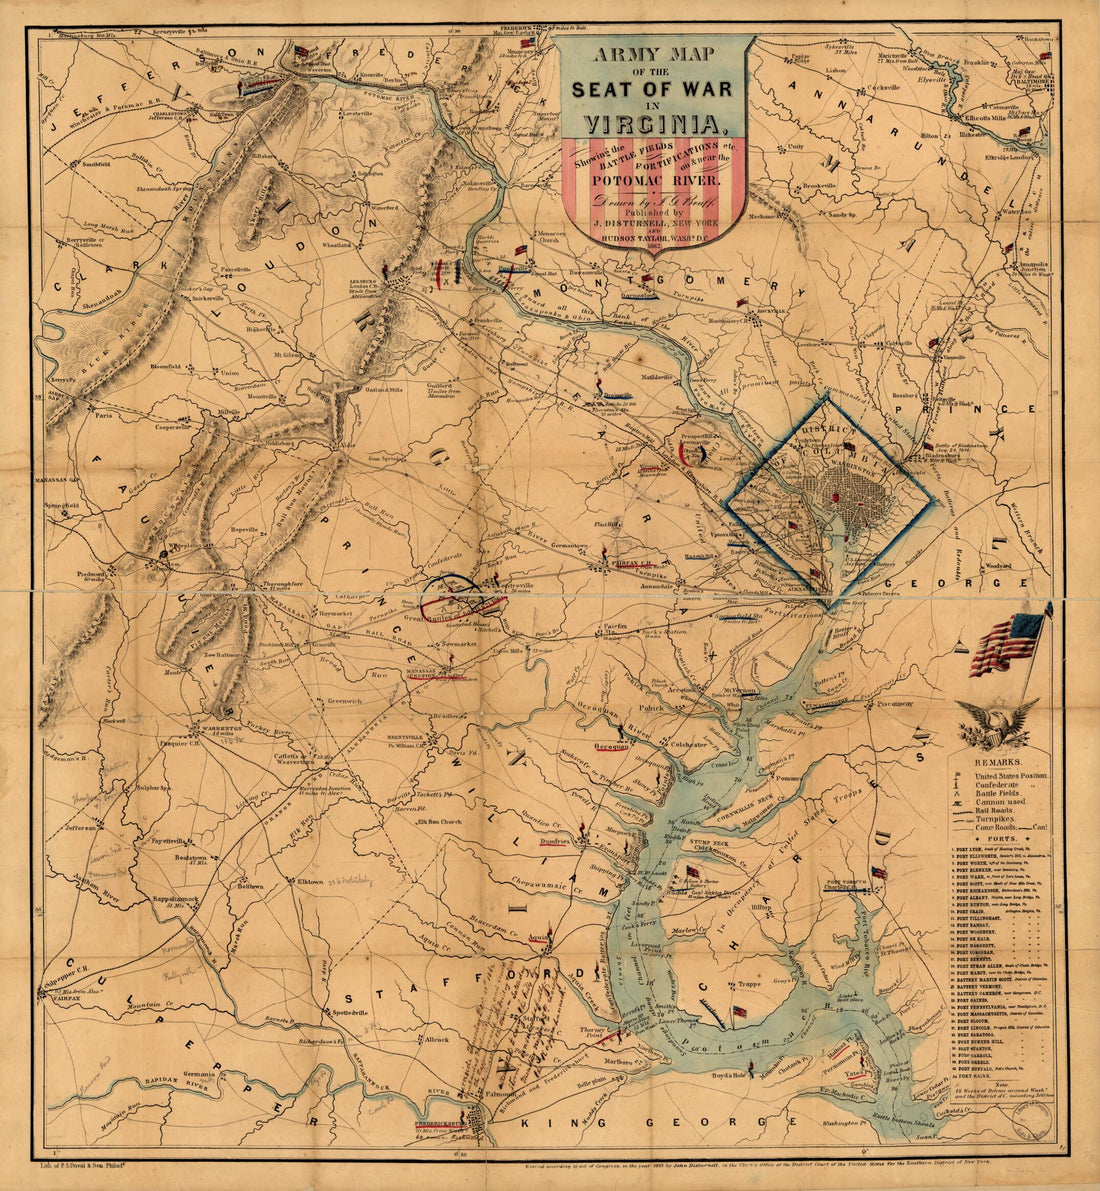 This old map of Army Map of the Seat of War In Virginia, Showing the Battle Fields, Fortifications, Etc. On &amp; Near the Potomac River from 1862 was created by Joseph Goldsborough Bruff in 1862